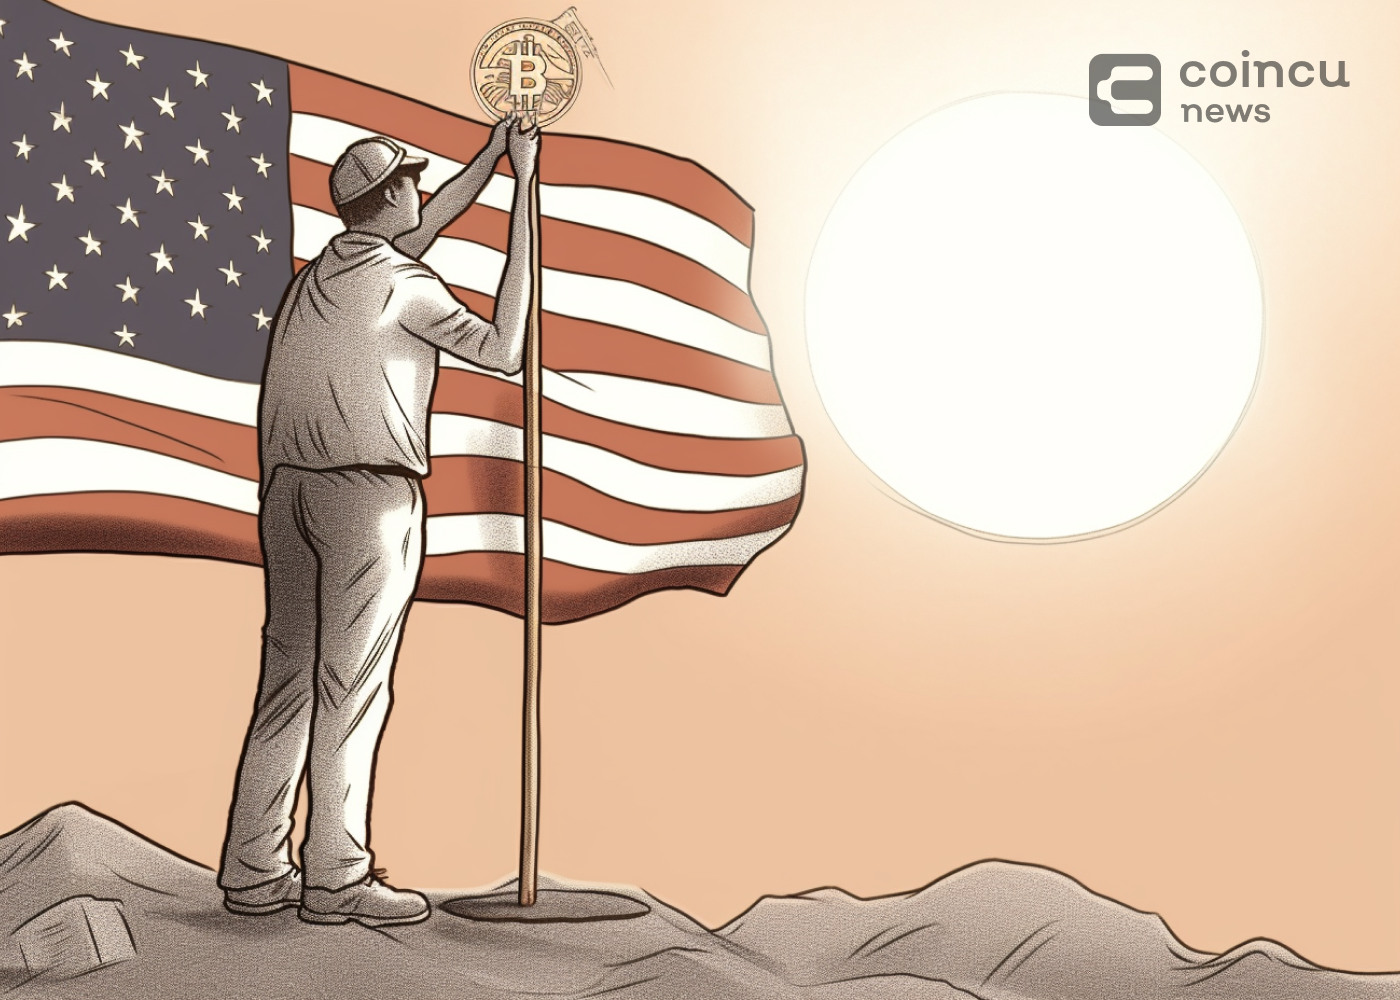 US Inflation Rises To 3.2% In July, Bitcoin Steady At $29,600